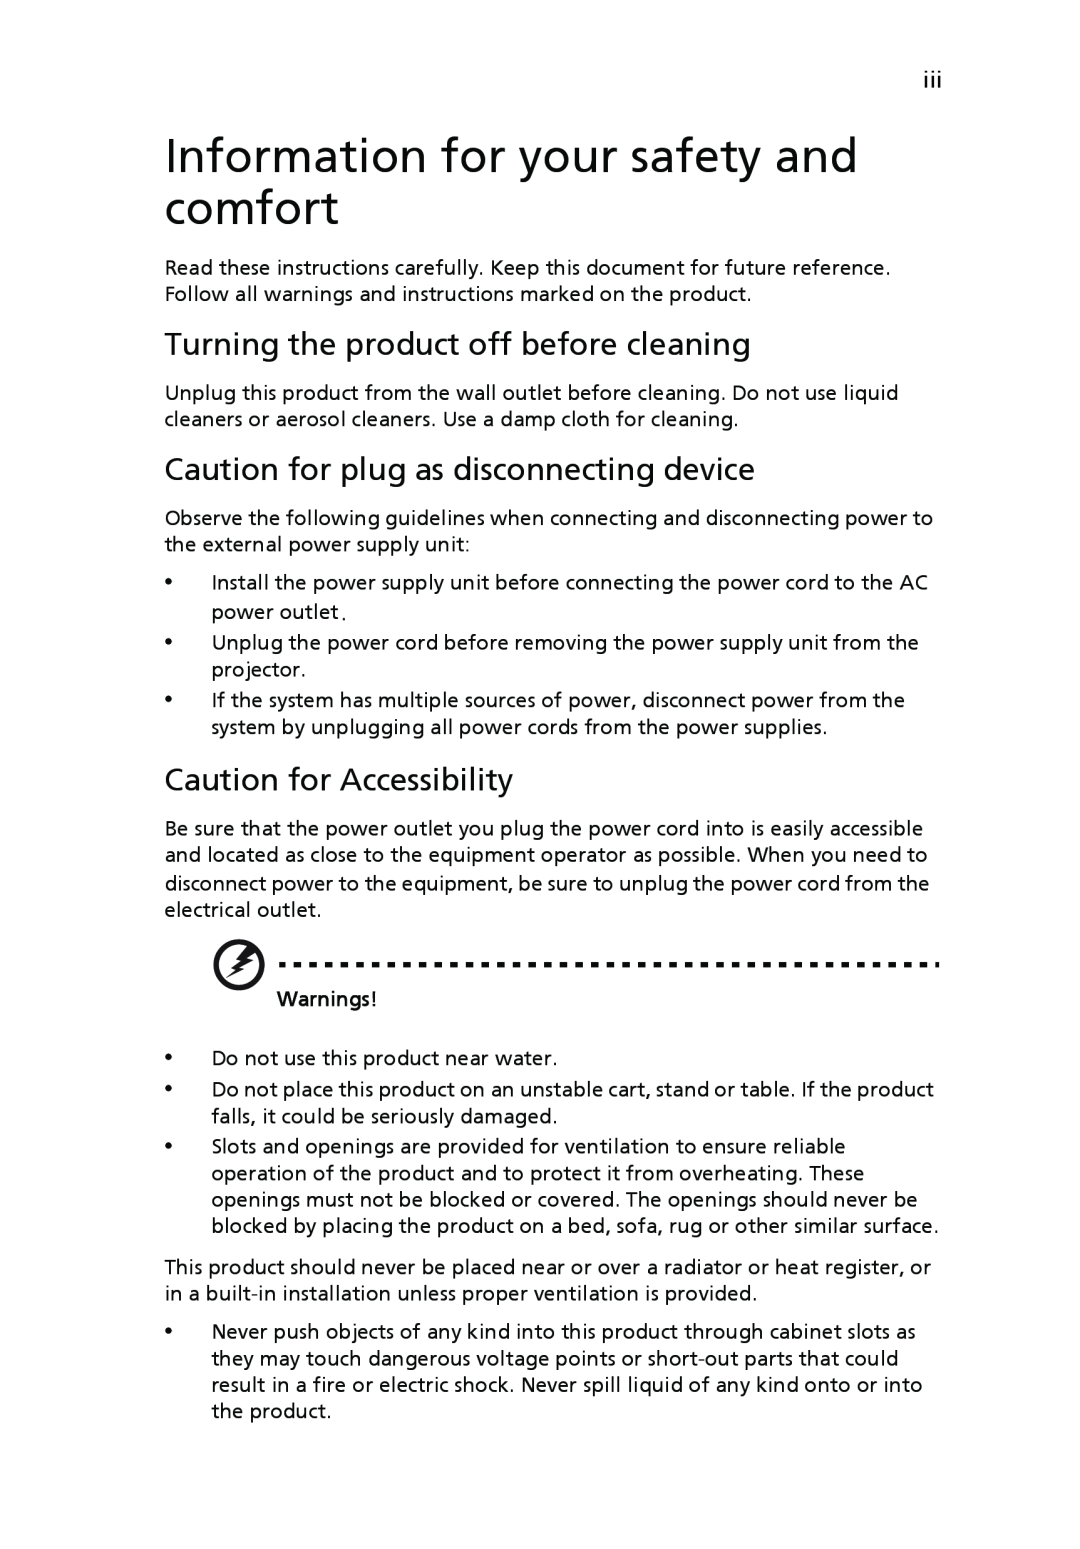 Acer P7280 Information for your safety and comfort, Turning the product off before cleaning, Caution for Accessibility 